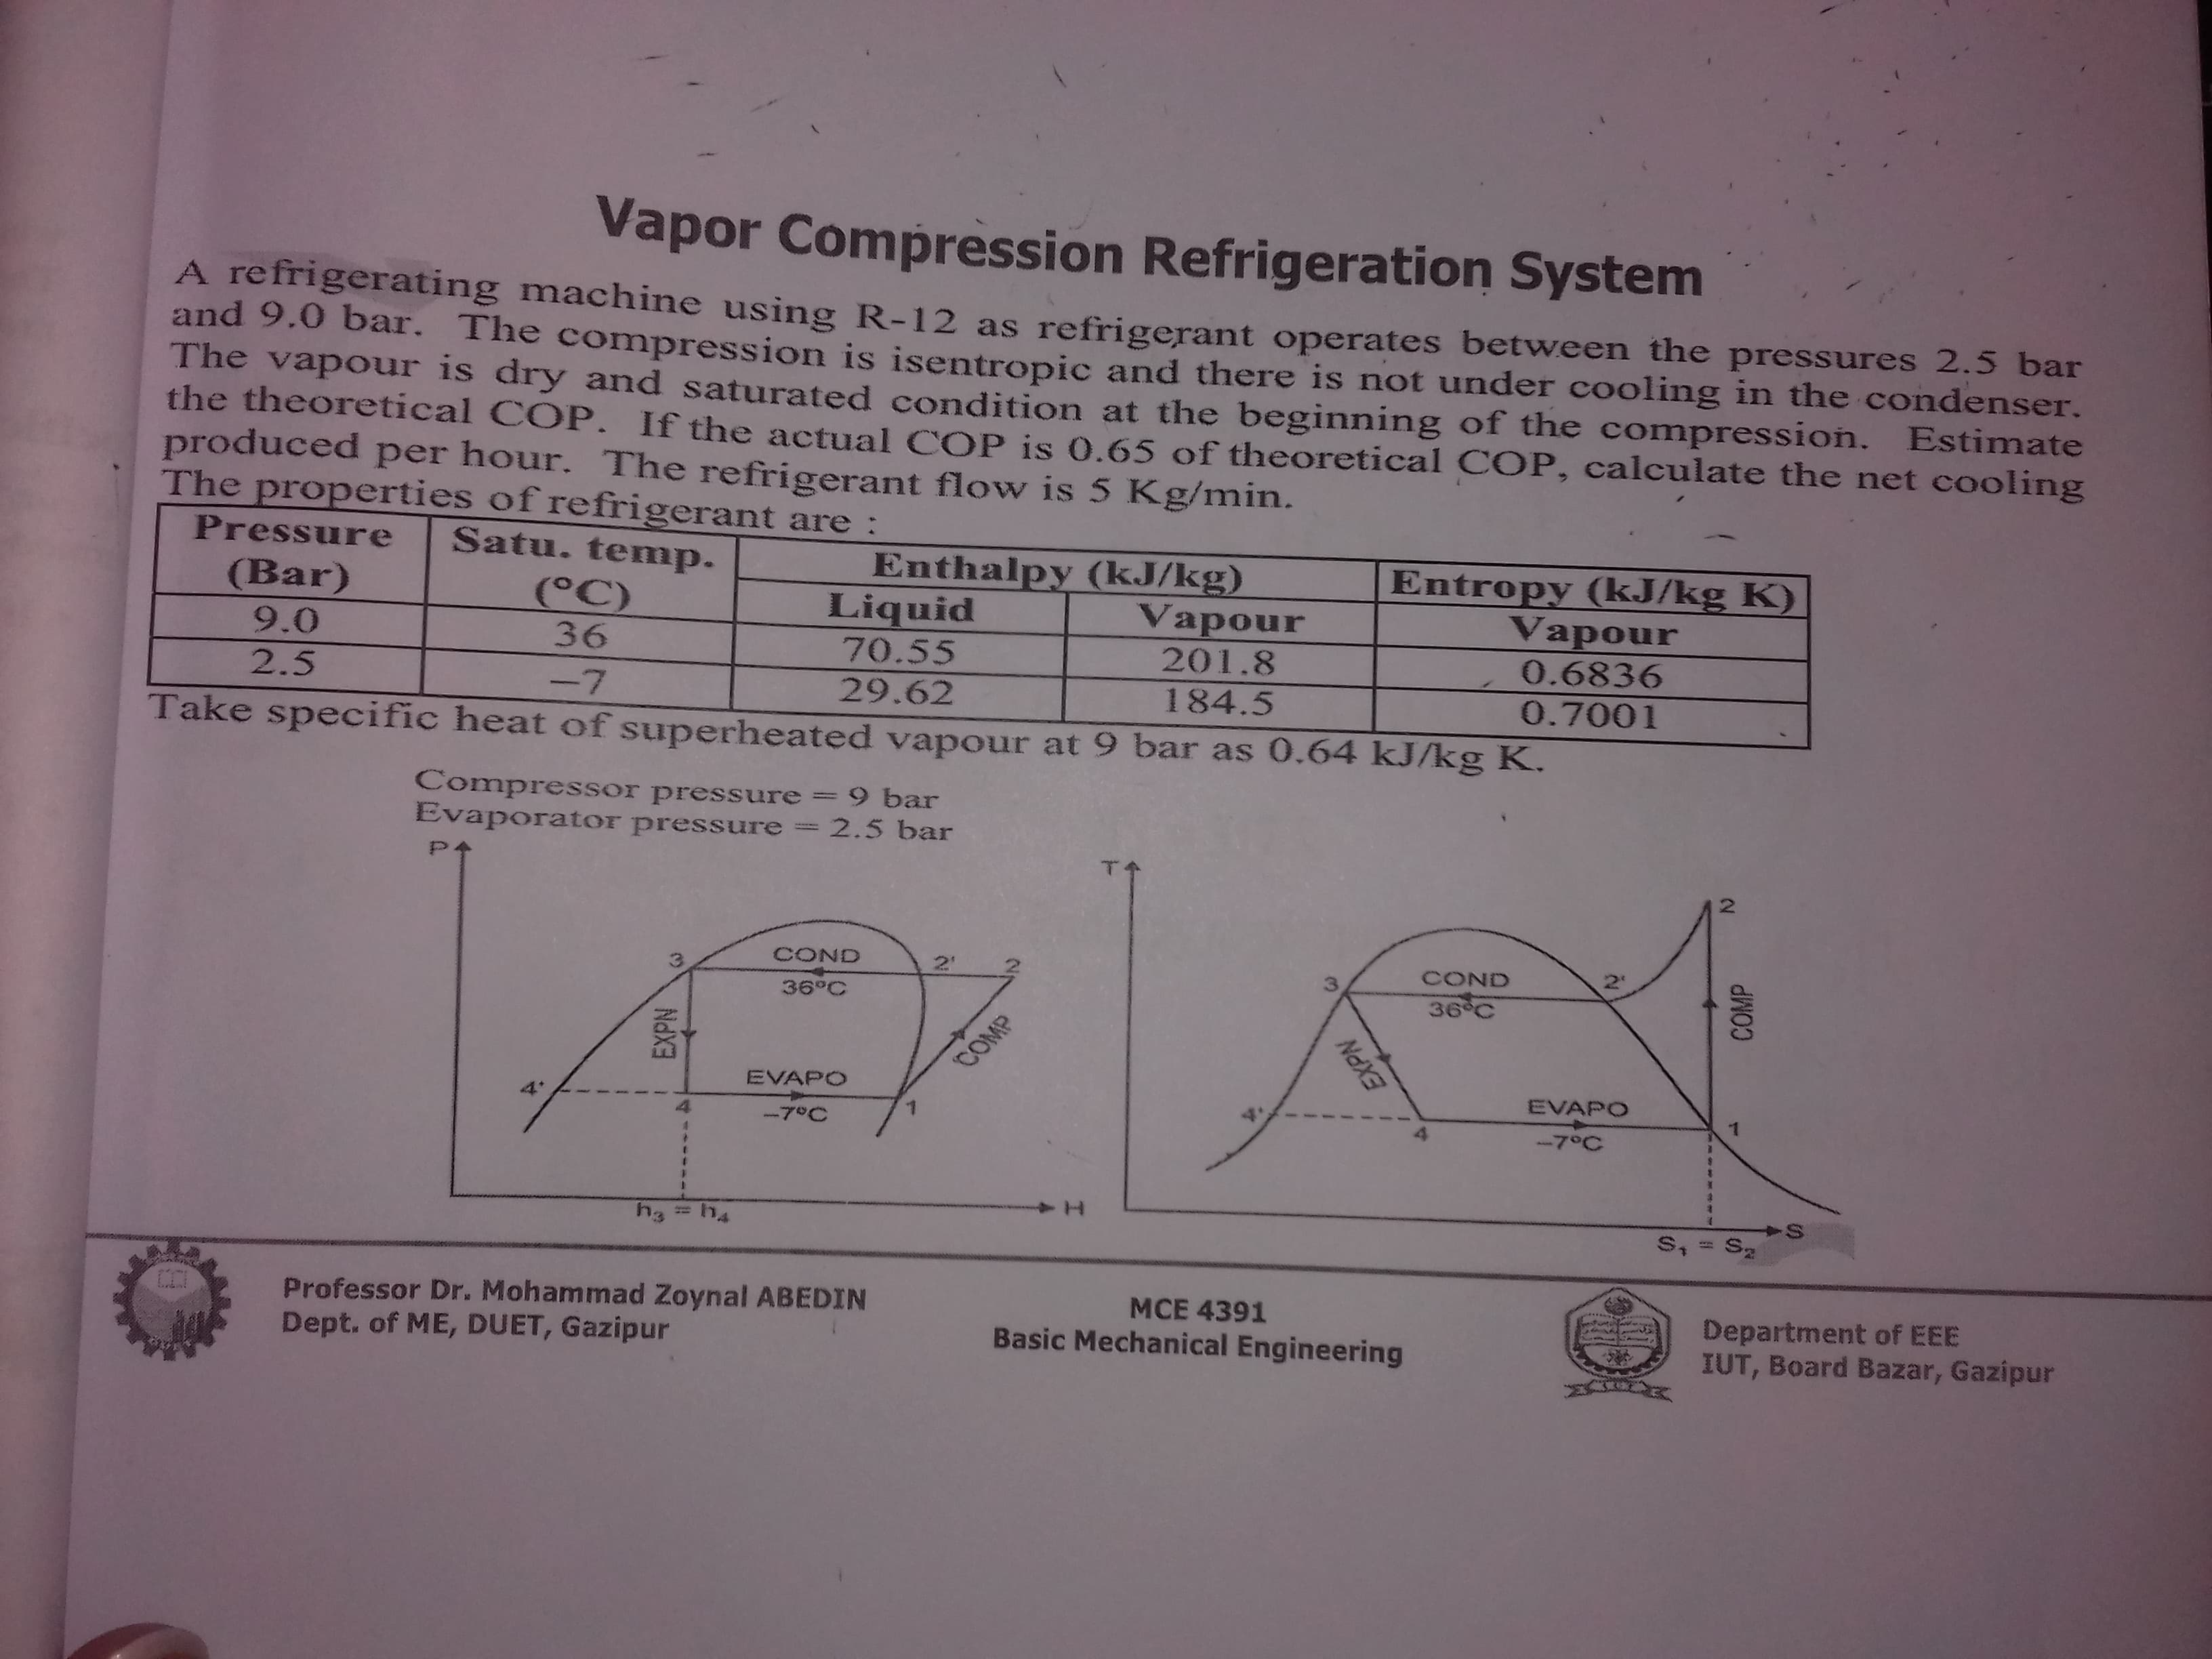 Vapor Compression Refrigeration System
A refrigerating machine using R-12 as refrigerant operates between the pressures 2.5 bar
and 9.0 bar. The compression is isentropic and there is not under cooling in the condenser.
The vapour is dry and saturated condition at the beginning of the compression. Estimate
the theoretical COP. If the actual COP is 0.65 of theoretical COP, calculate the net cooling
produced per hour. The refrigerant flow is 5 Kg/min.
The properties of refrigerant are :
Pressure
Satu. temp.
(Bar)
9.0
Enthalpy (kJ/kg)
Liquid
70.55
Entropy (kJ/kg K)
Vapour
(°C)
Vapour
36
201.8
0.6836
2.5
-7
29.62
Take specific heat of superheated vapour at 9 bar as 0.64 kJ/kg K.
184.5
0.7001
Compressor pressure = 9 bar
Evaporator pressure = 2.5 bar
COND
COND
2'
36°C
36°C
COMP
EVAPO
EVAPO
-7°C
-7°C
h4
Professor Dr. Mohammad Zoynal ABEDIN
Dept. of ME, DUET, Gazipur
MCE 4391
Department of EEE
IUT, Board Bazar, Gazipur
Basic Mechanical Engineering
EXPN
COMP
2.
